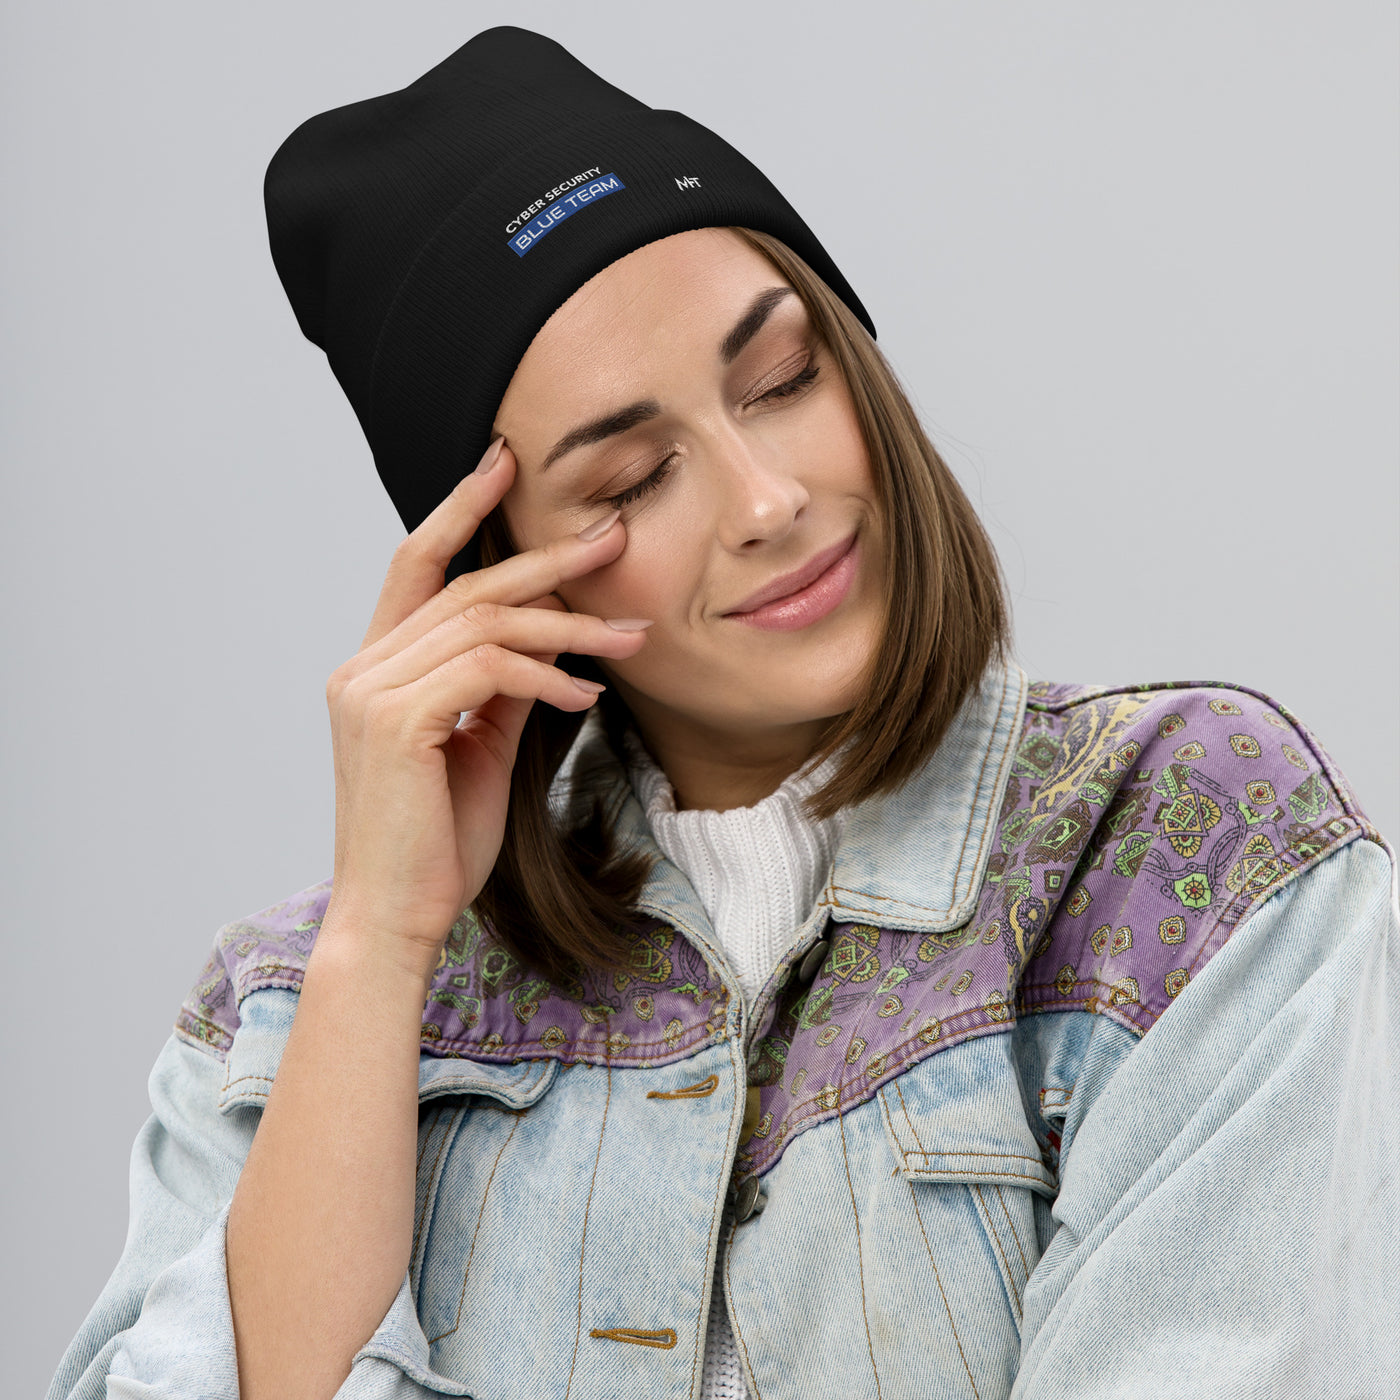 Cyber Security Blue Team V12 - Embroidered Beanie